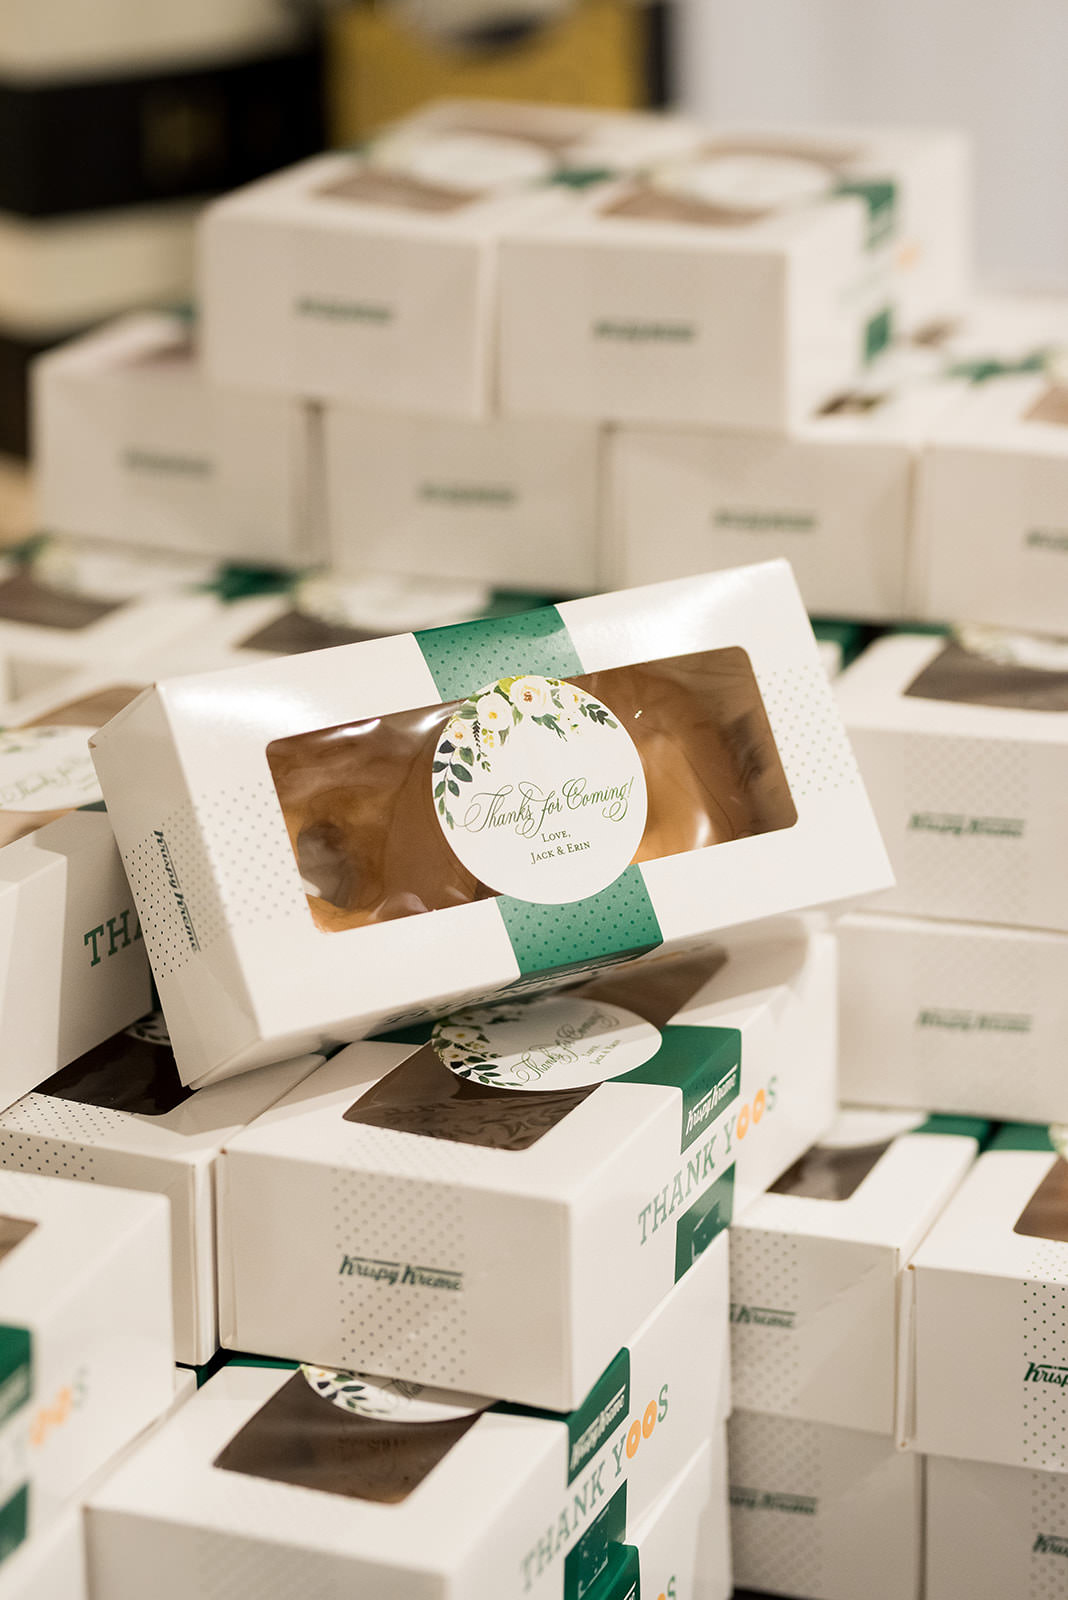 Classic Wedding Favors, Individual Donuts in Boxes for Guests | Krispy Kreme Wedding Favors